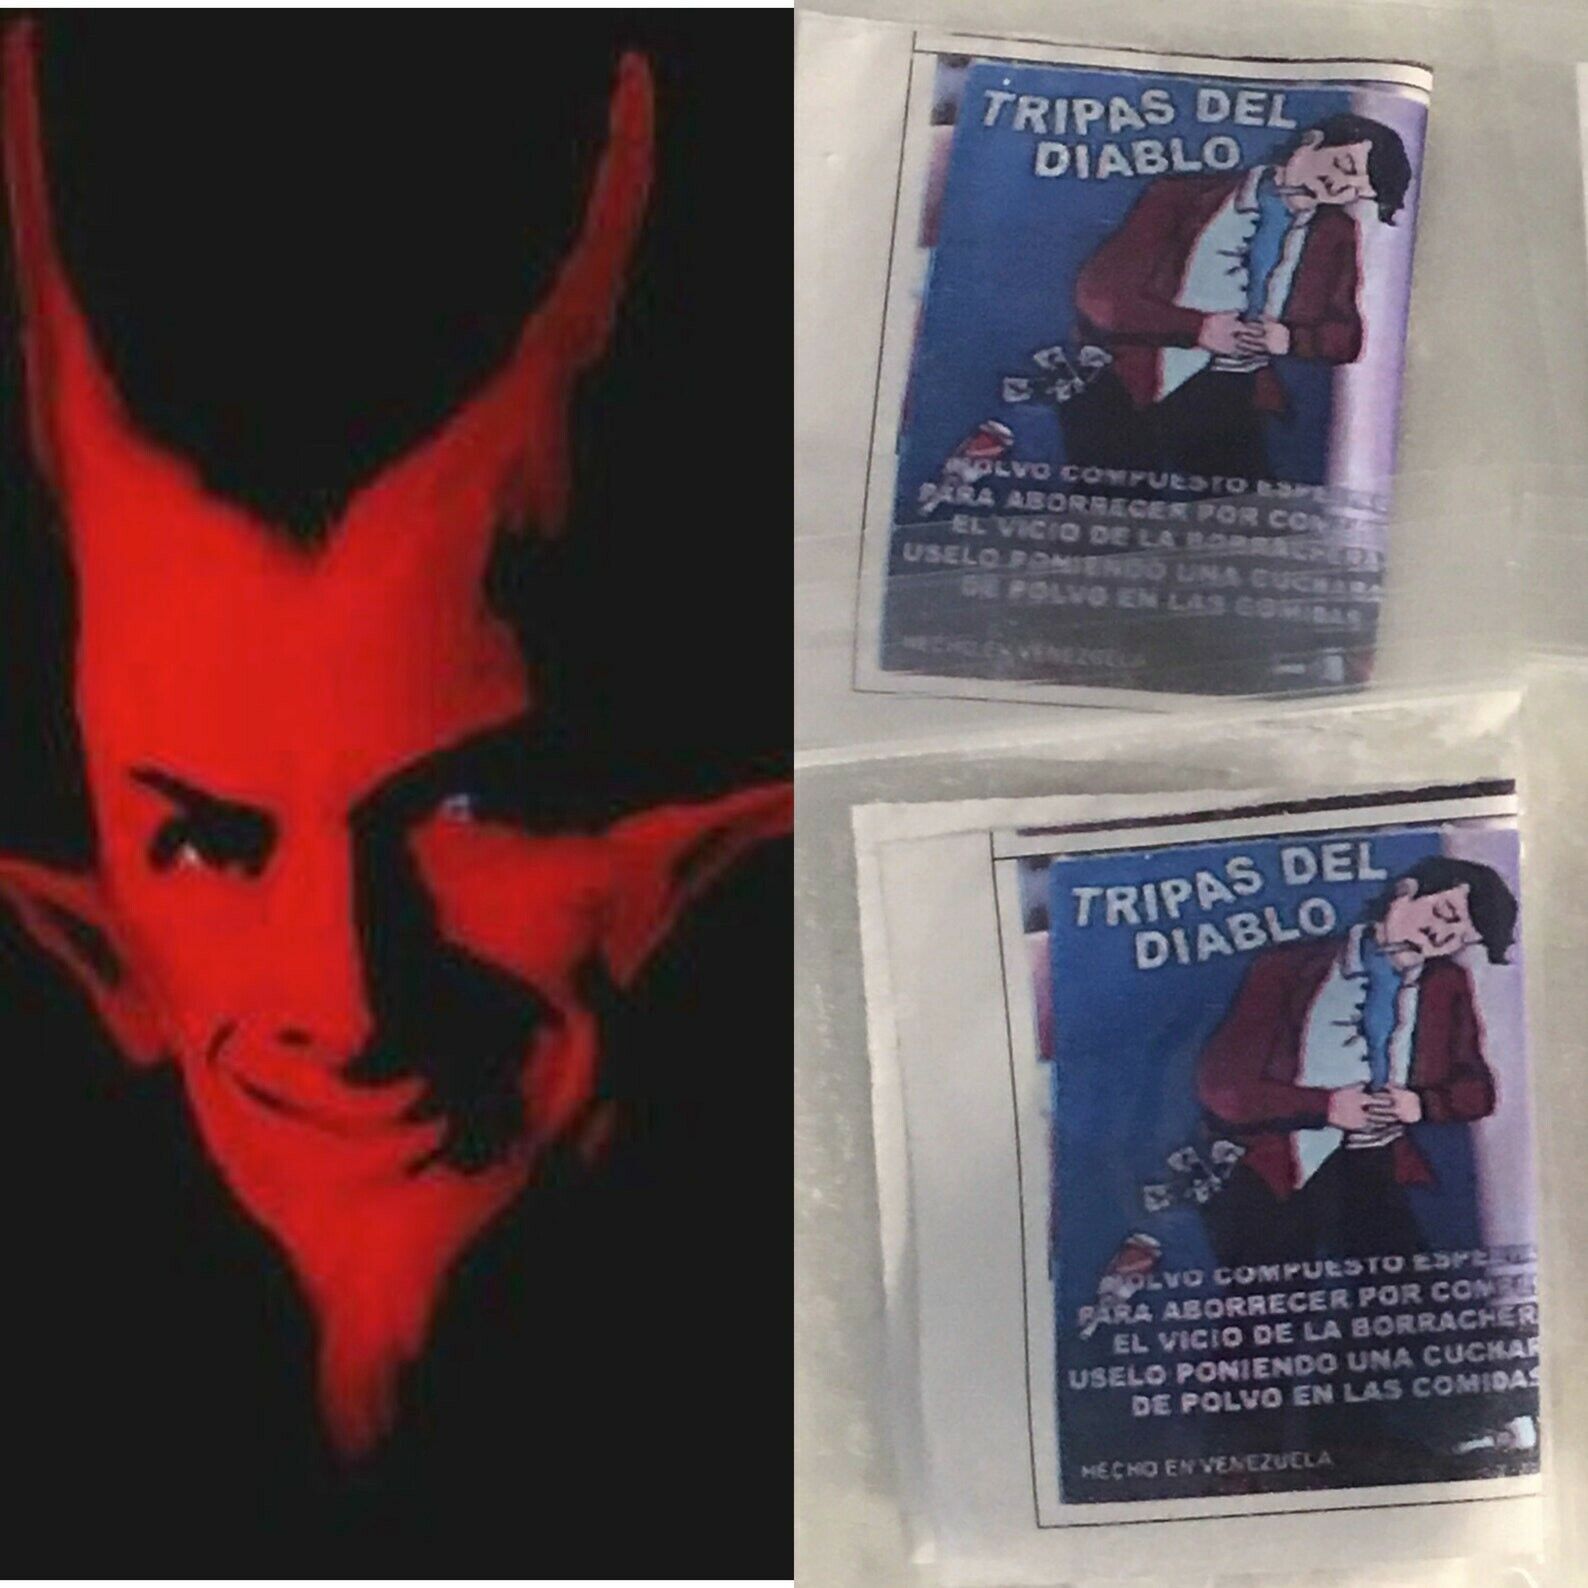 TRIPAS DEL DIABLO - Devil's Guts Powder to completely abhor the vice of alcohol